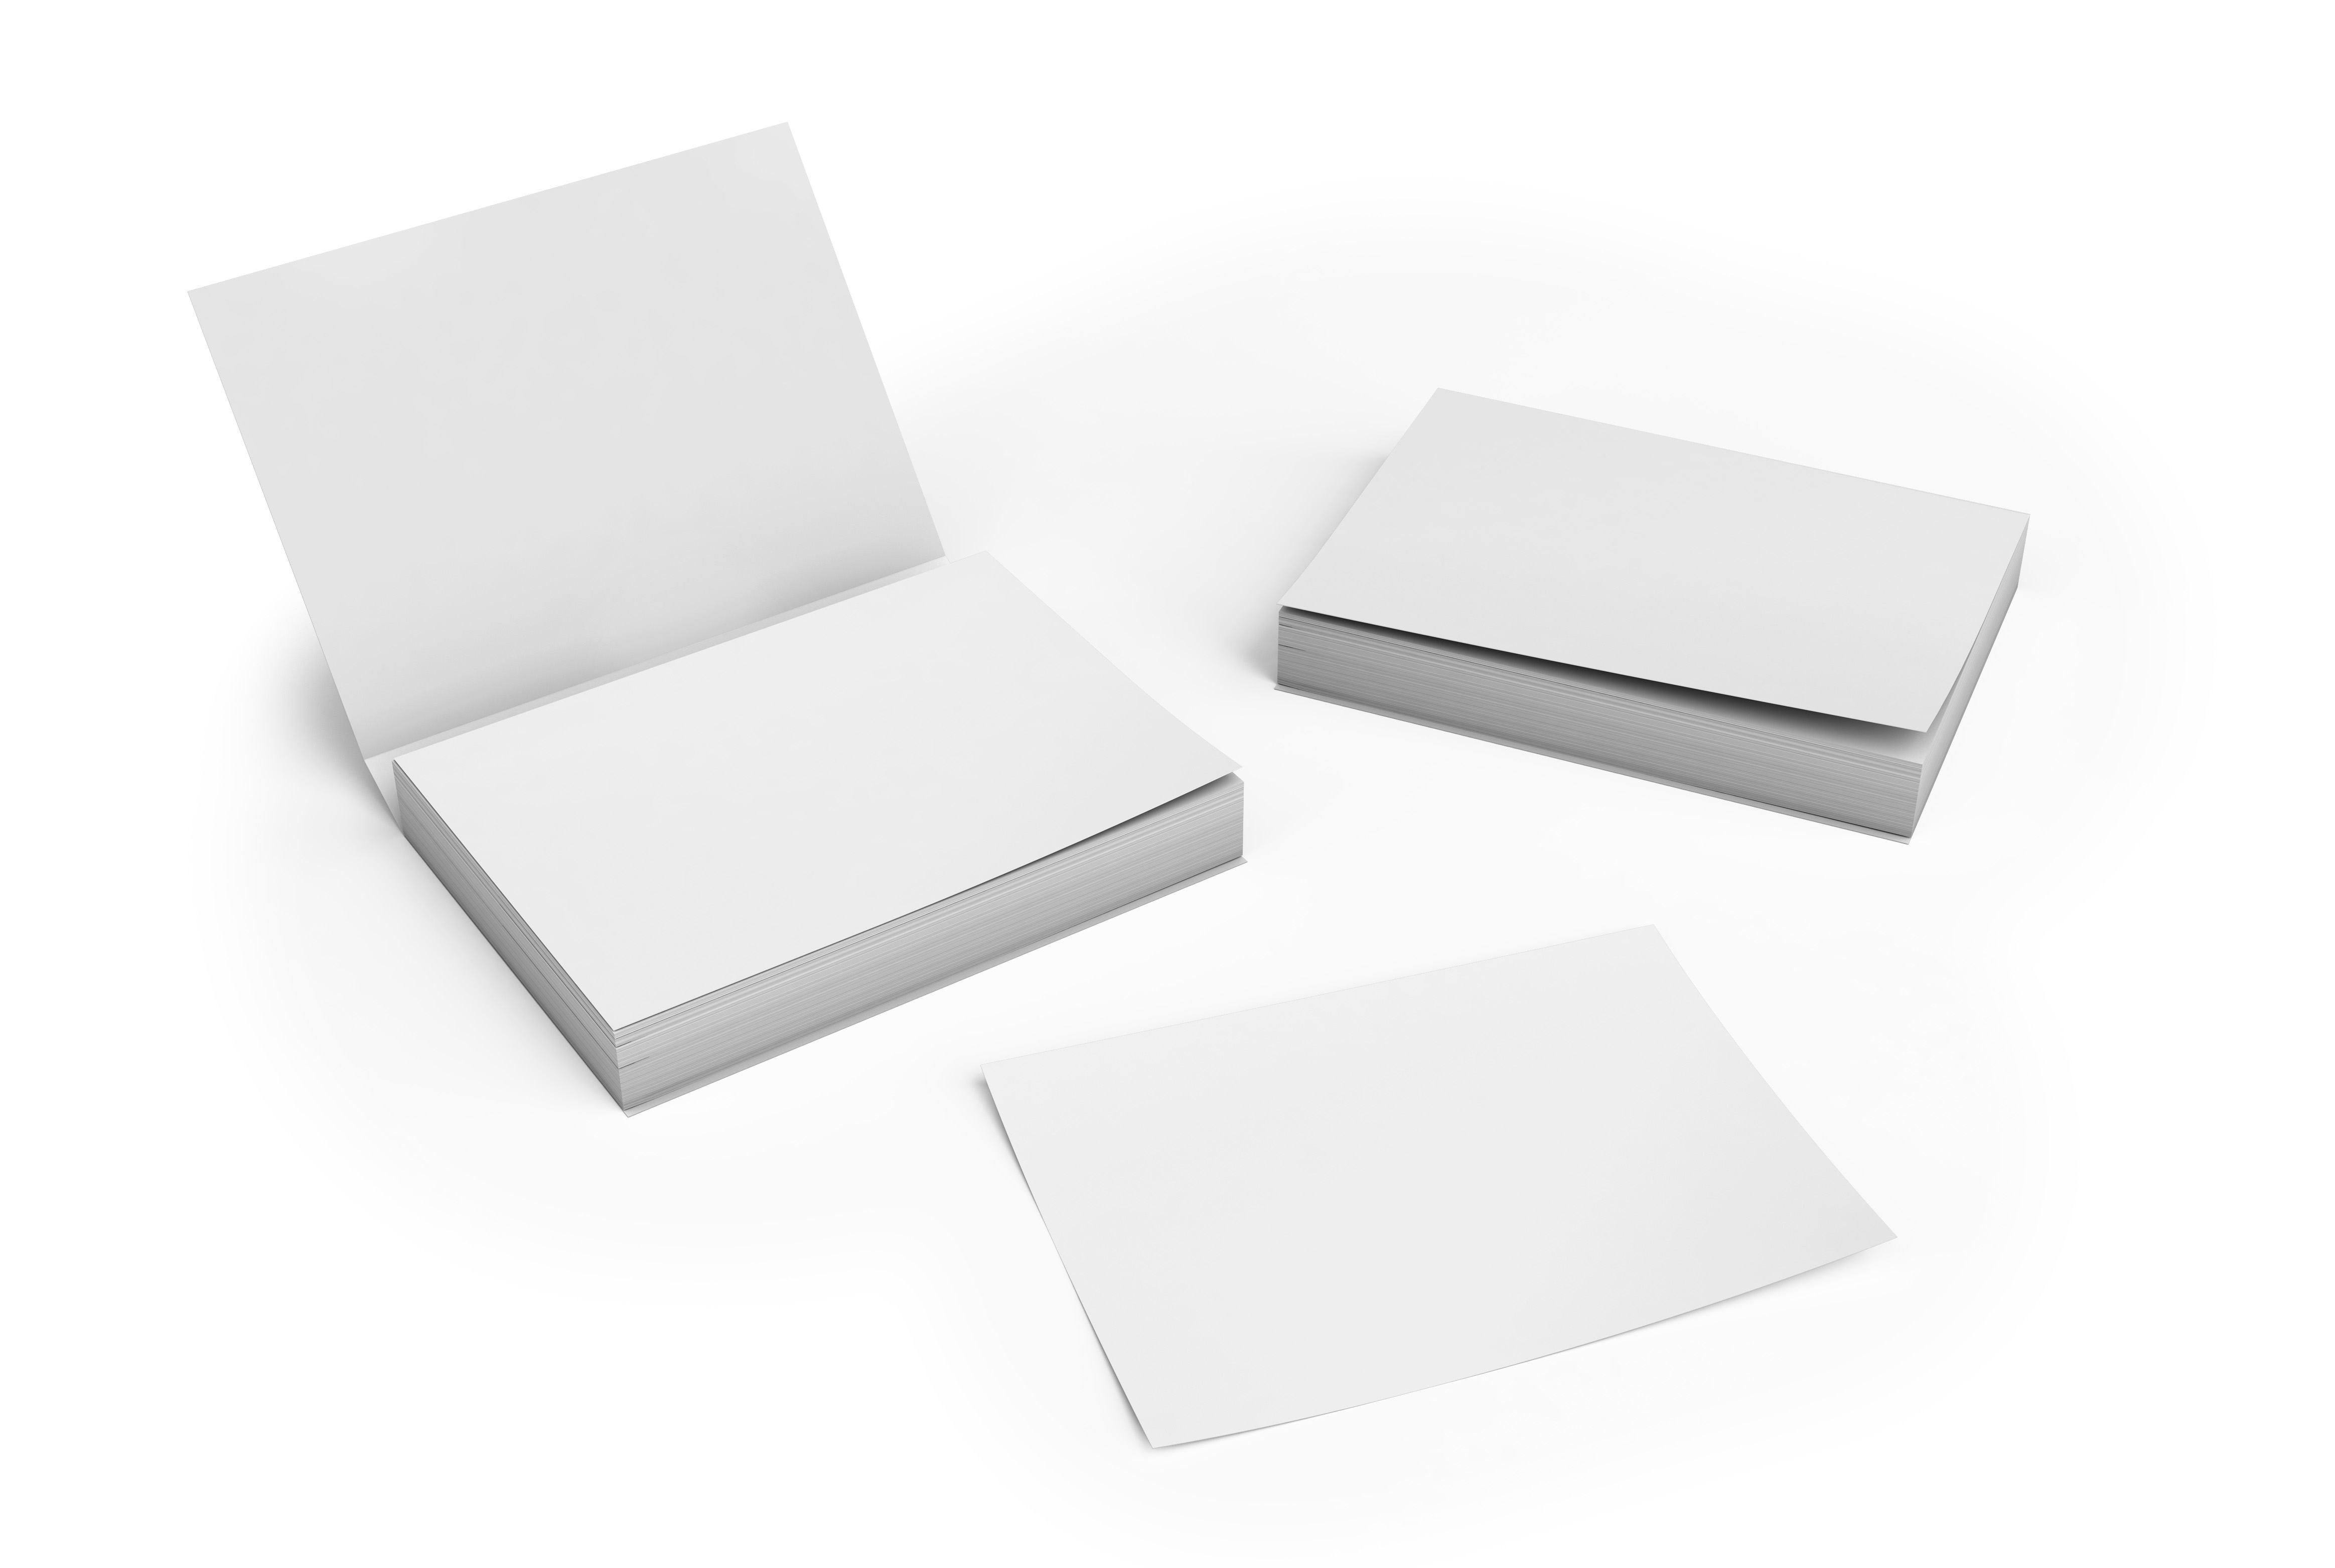 Sample Set of Sticky Notes with Softcover